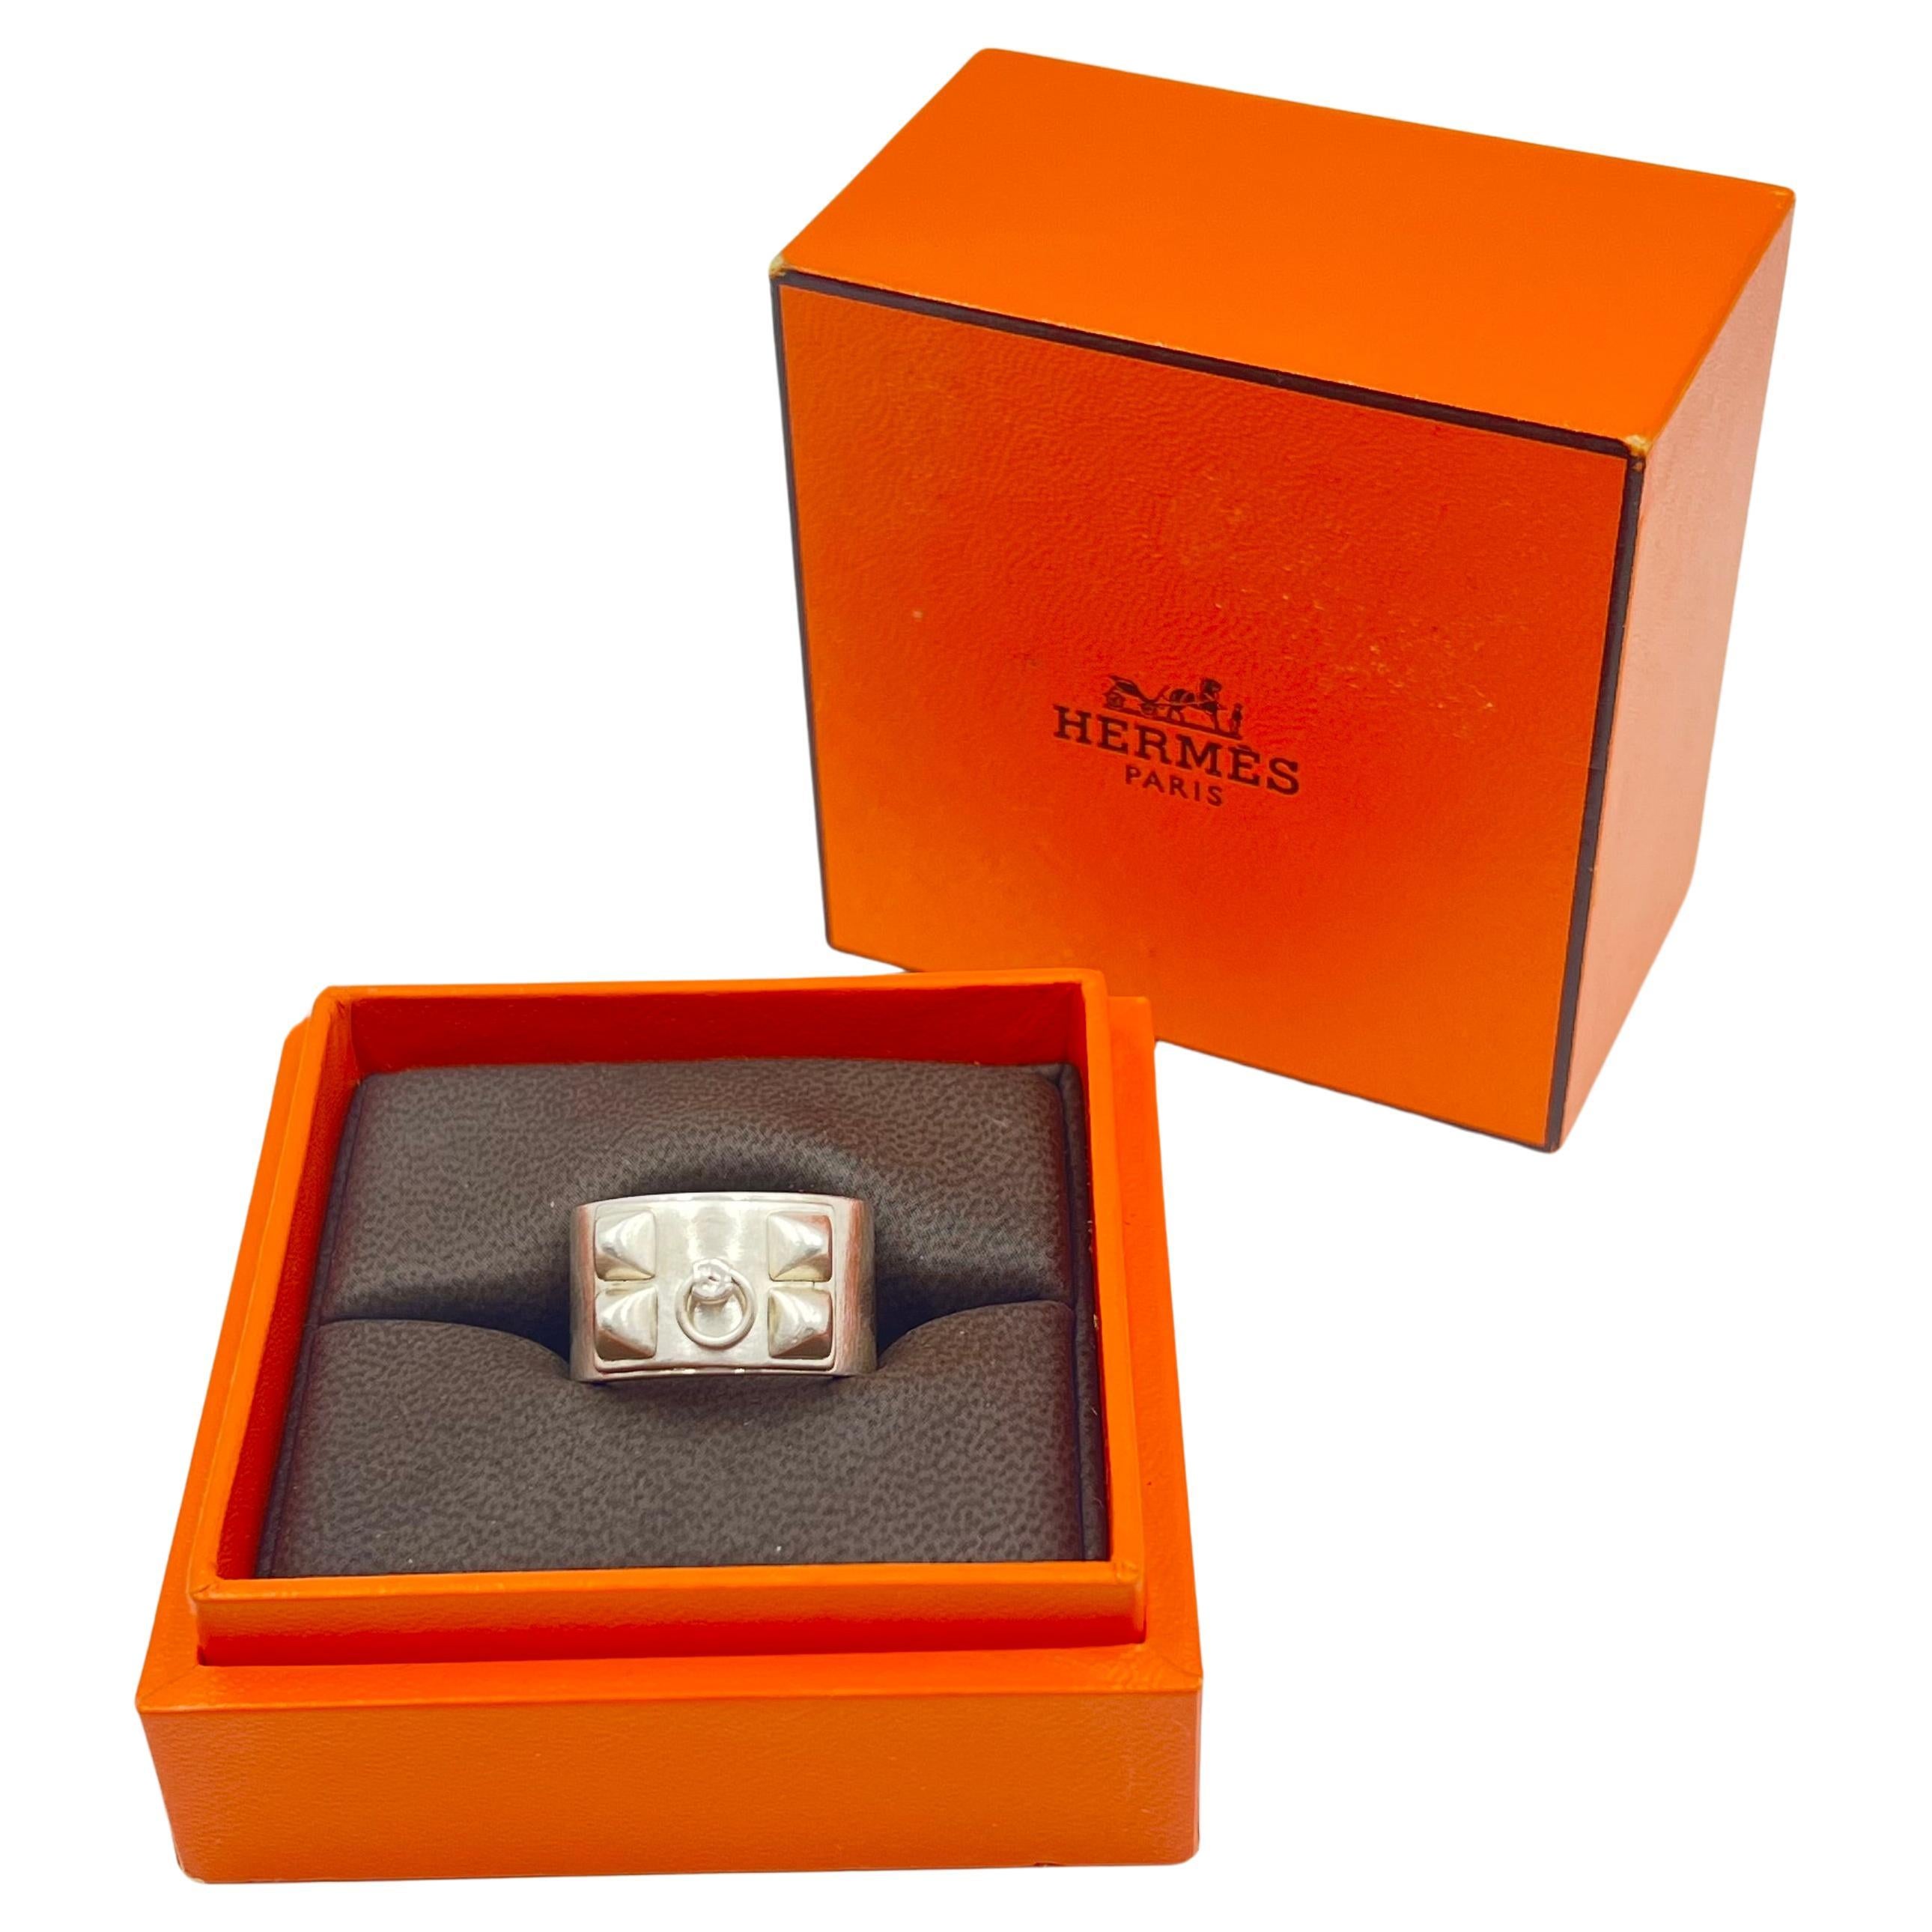 Hermès 'Collier De Chien' medium design ring.  Polished silver with bridal ring and double row of four pyramidal studs.  Signed 'HERMES' with sterling silver mark 'Ag925' '53'.  Includes orange Hermes ring box. 

In Thierry Hermès crafted a